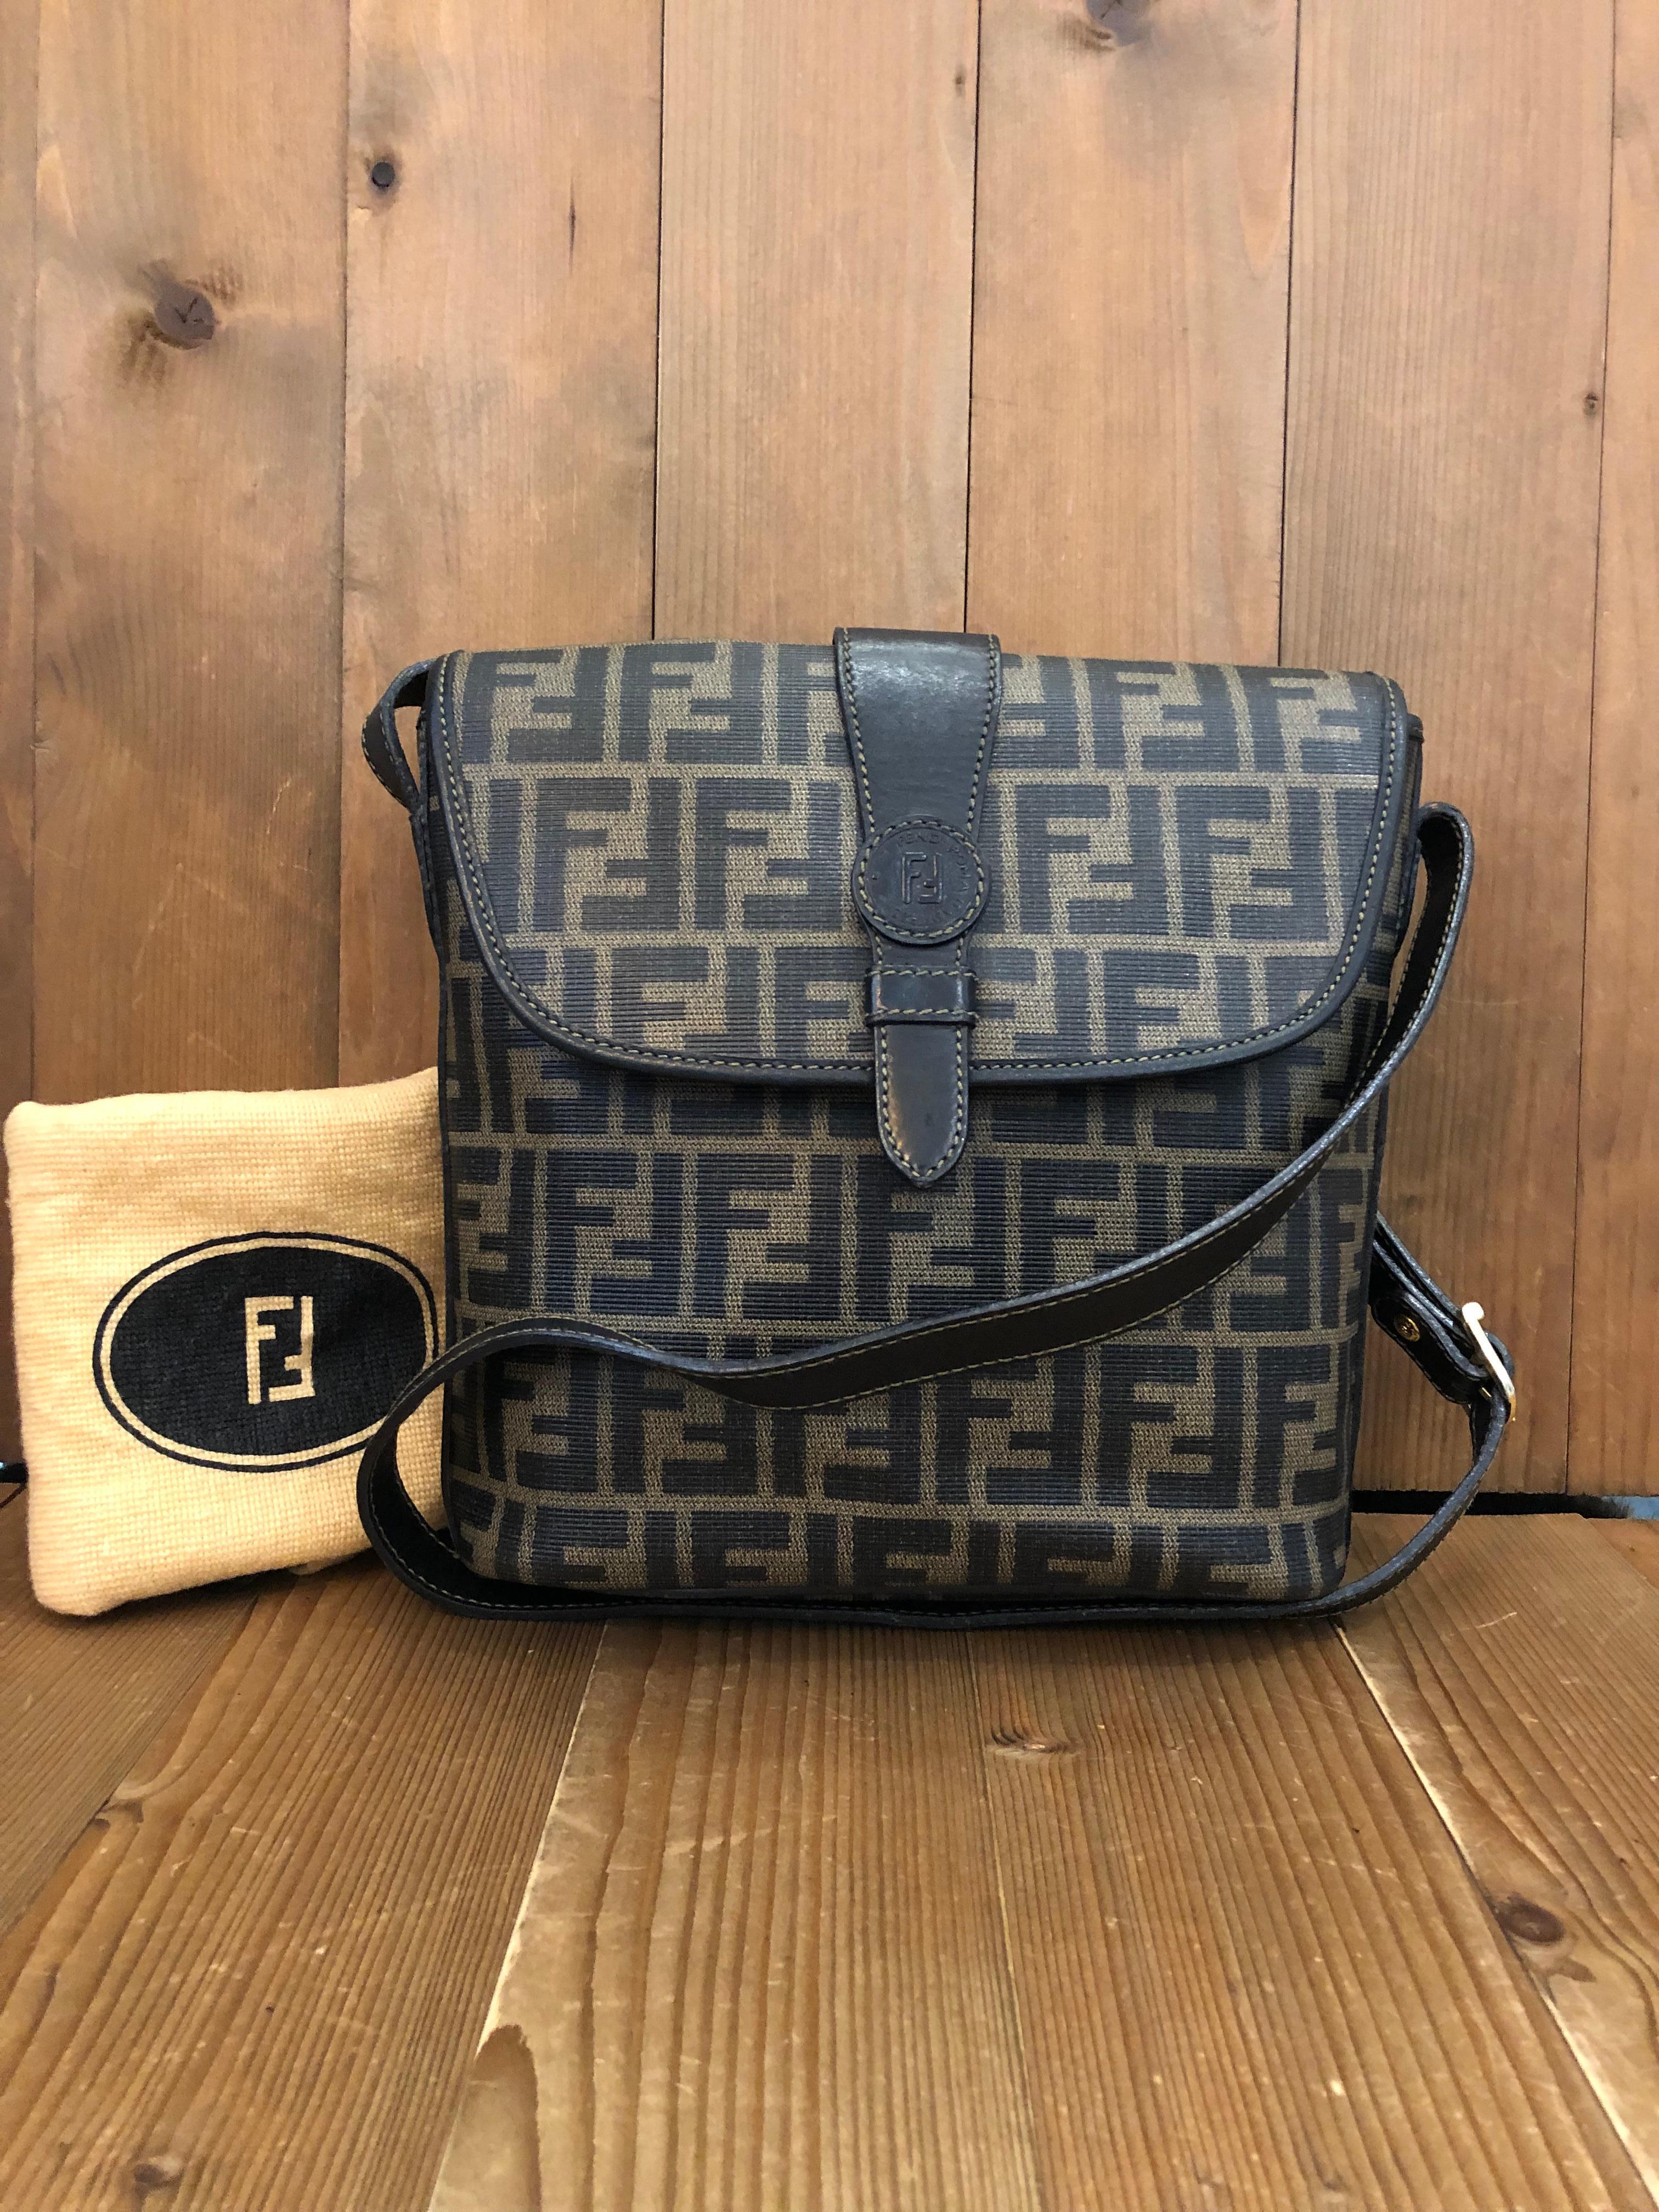 This is an exceptional vintage Fendi camera bag in Fendi’s iconic brown Zucca coated canvas and gold toned hardware. Front flap with magnetic snap closure. The messenger bag has a main spacious compartment with one interior zip pocket and one back